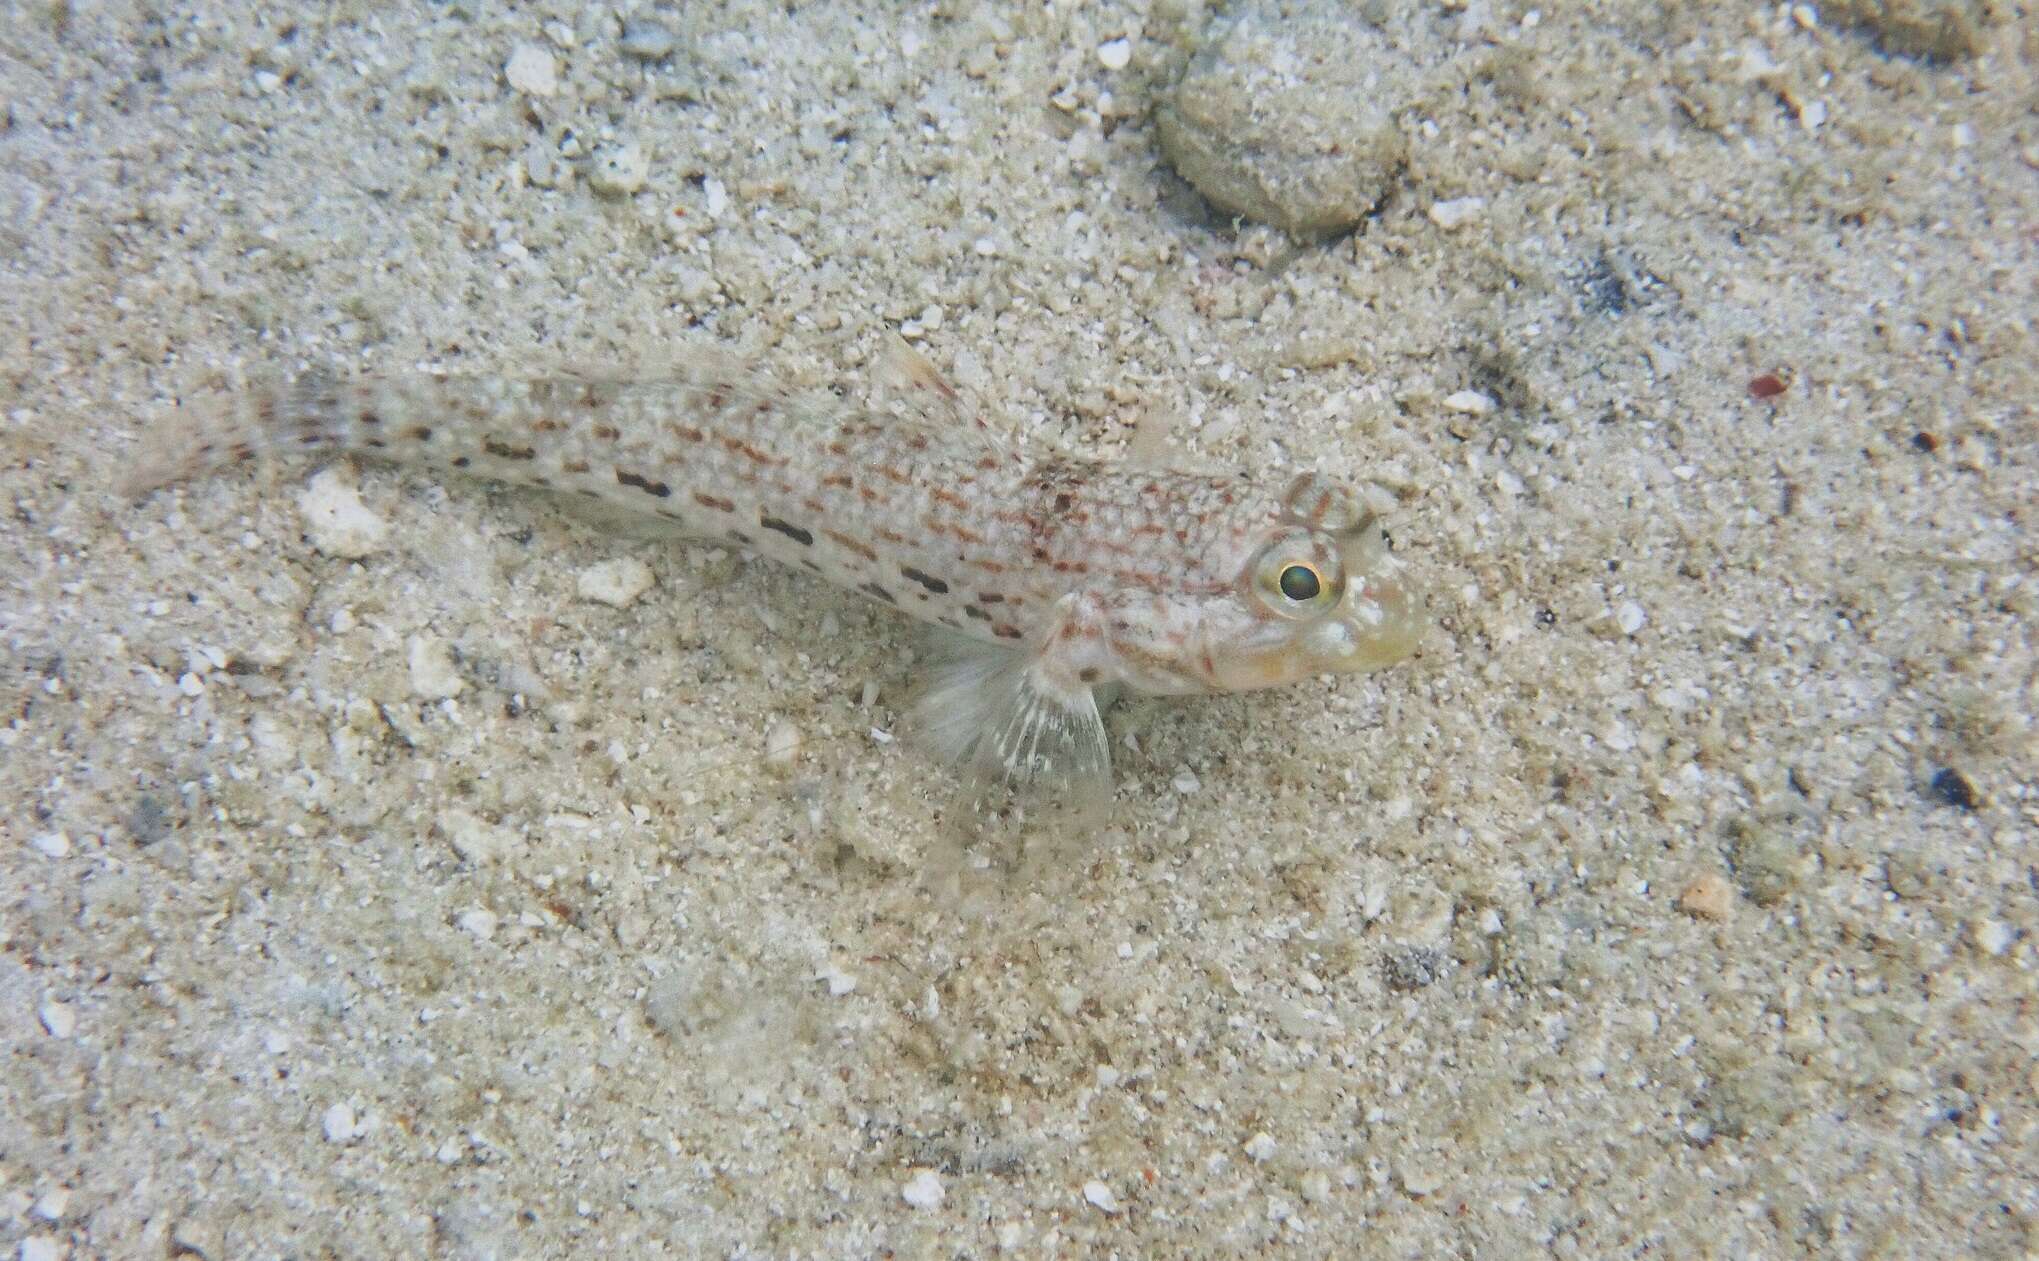 Image of Ornate goby